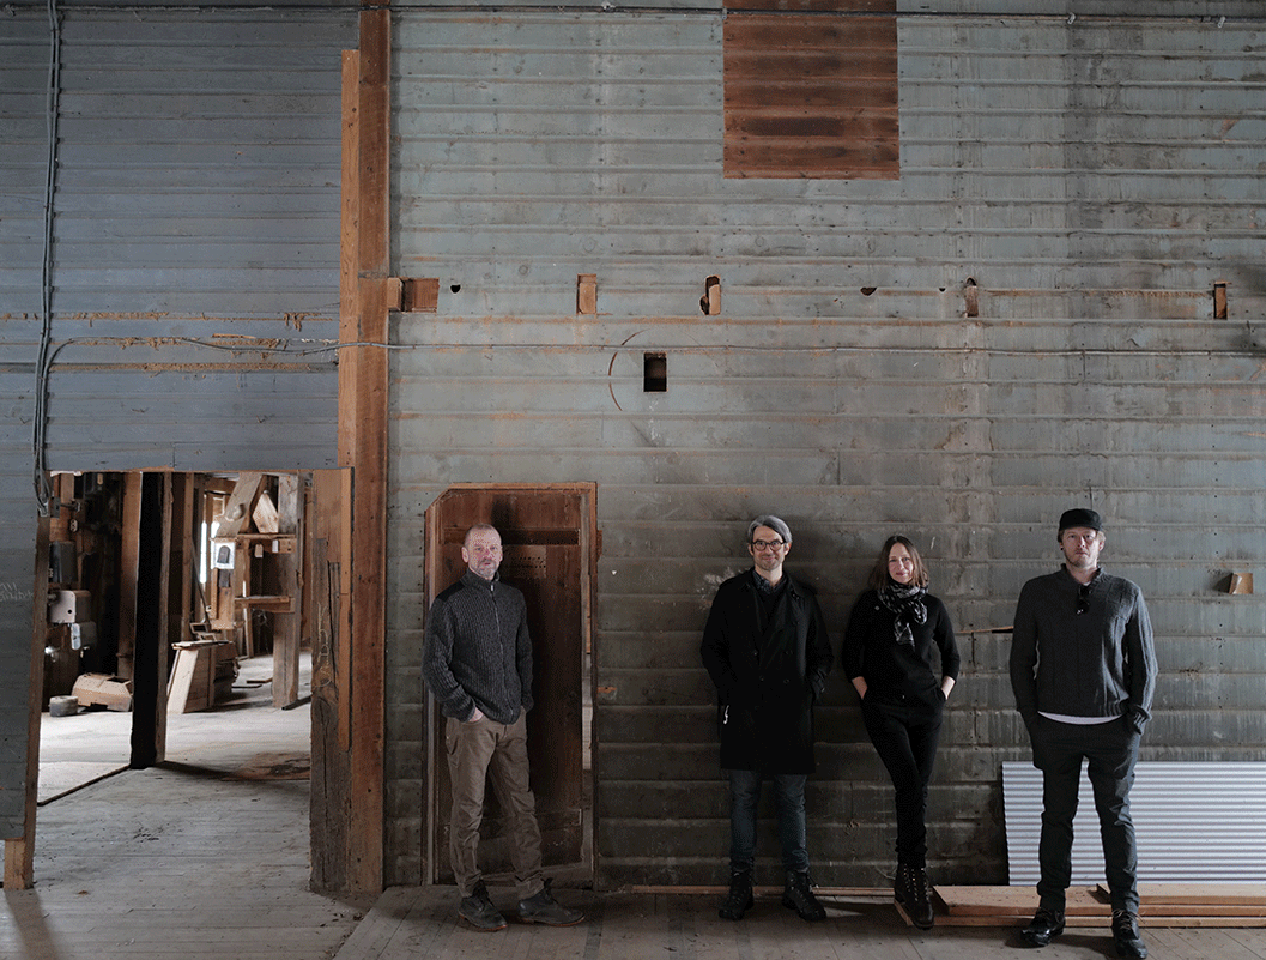 The Oberon Group does a site visit at the future site of The Granary in Accord, New York. Four people stand in front of an interior wall, with light streaming in from the right.